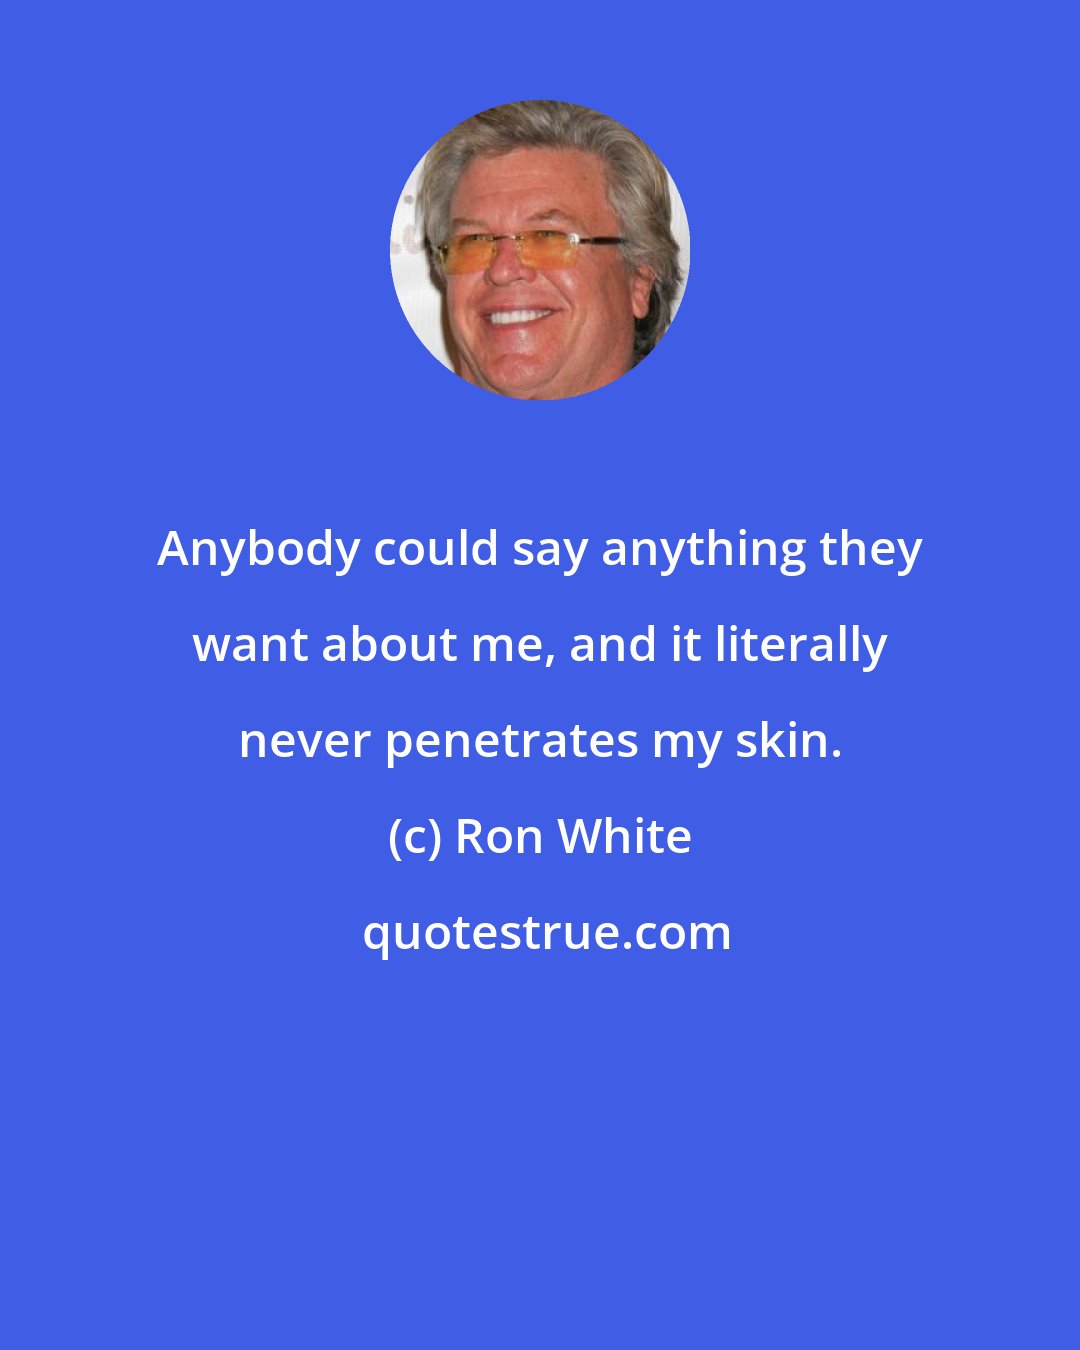 Ron White: Anybody could say anything they want about me, and it literally never penetrates my skin.